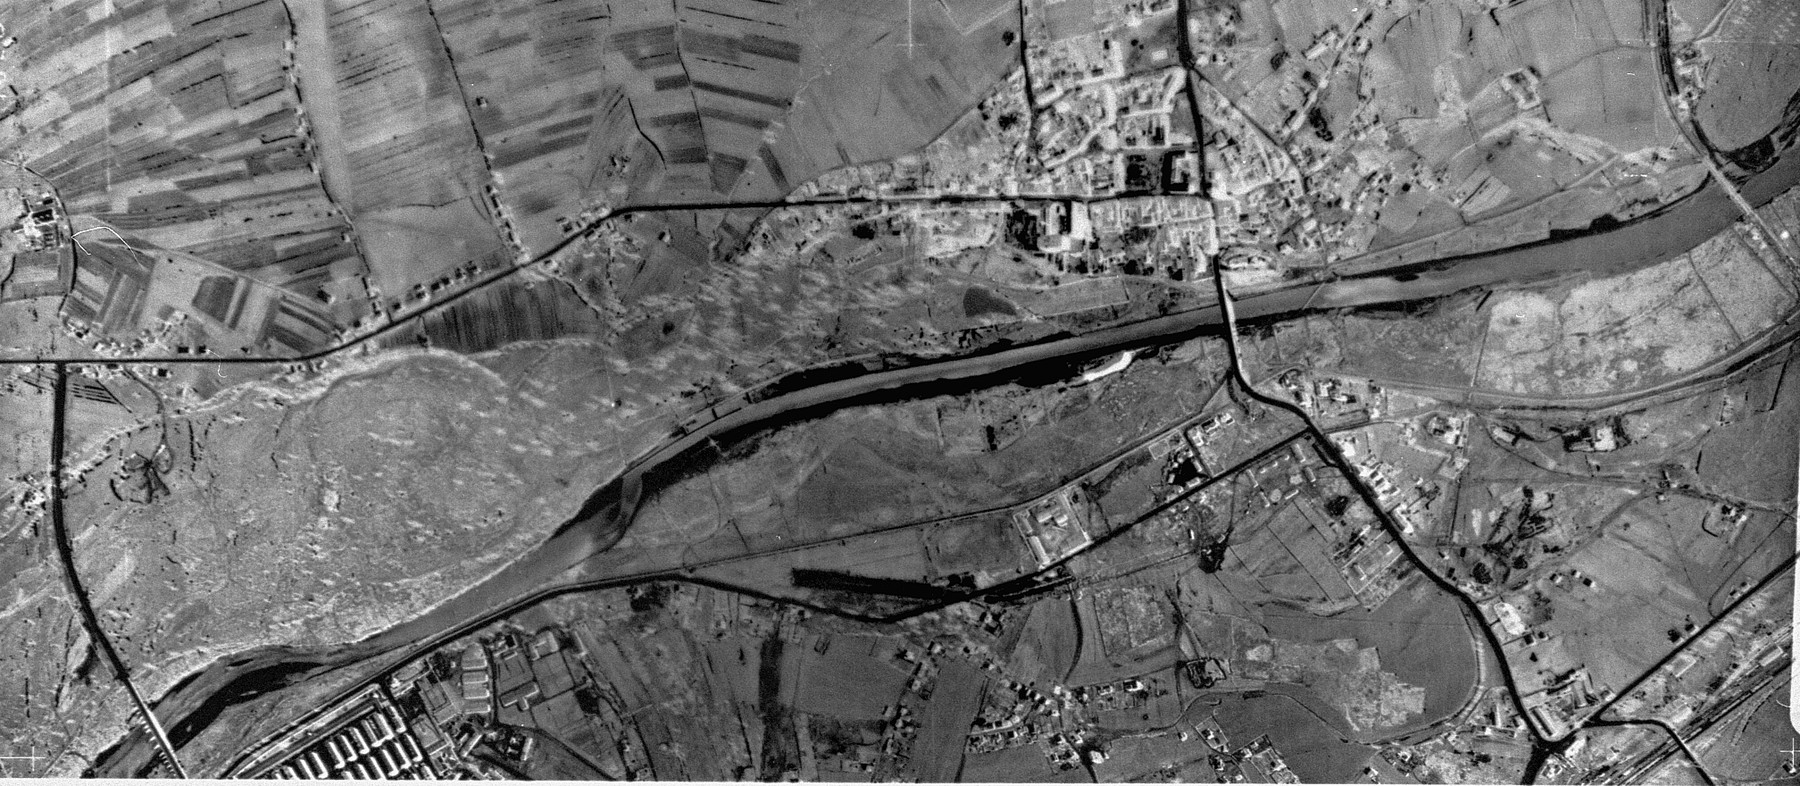 An aerial reconnaissance photograph of the Auschwitz area showing a small corner of  Auschwitz I .  The town of Oswiecim appears in the middle of the image.